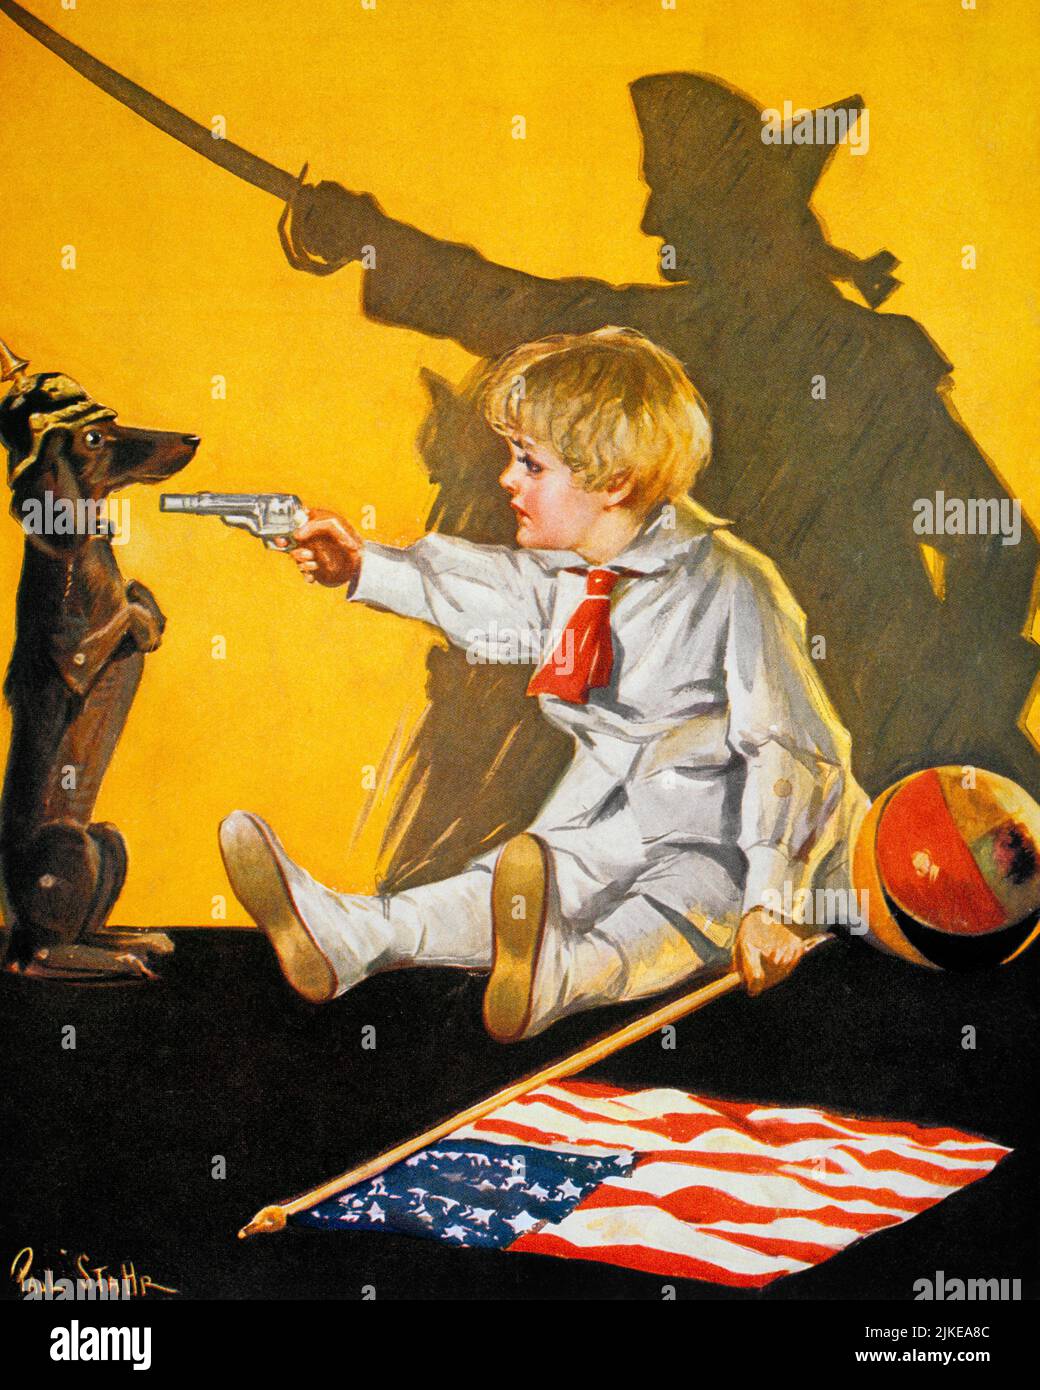 1910s ANTI GERMAN PROPAGANDA PRIOR TO WW1 LITTLE BOY WITH GEORGE WASHINGTON SHADOW POINTING GUN AT DACHSHUND IN KAISER HELMET - kh13558 NAW001 HARS COPY SPACE MALES FREEDOM MAMMALS COURAGE CANINES LEADERSHIP WORLD WARS WORLD WAR POLITICS PROPAGANDA POOCH CONCEPTUAL PATRIOTIC STARS AND STRIPES BABY BOY OLD GLORY CANINE FIREARM FIREARMS JUVENILES MAMMAL RED WHITE AND BLUE WORLD WAR ONE WW1 CAUCASIAN ETHNICITY DACHSHUND KAISER OLD FASHIONED PRIOR Stock Photo